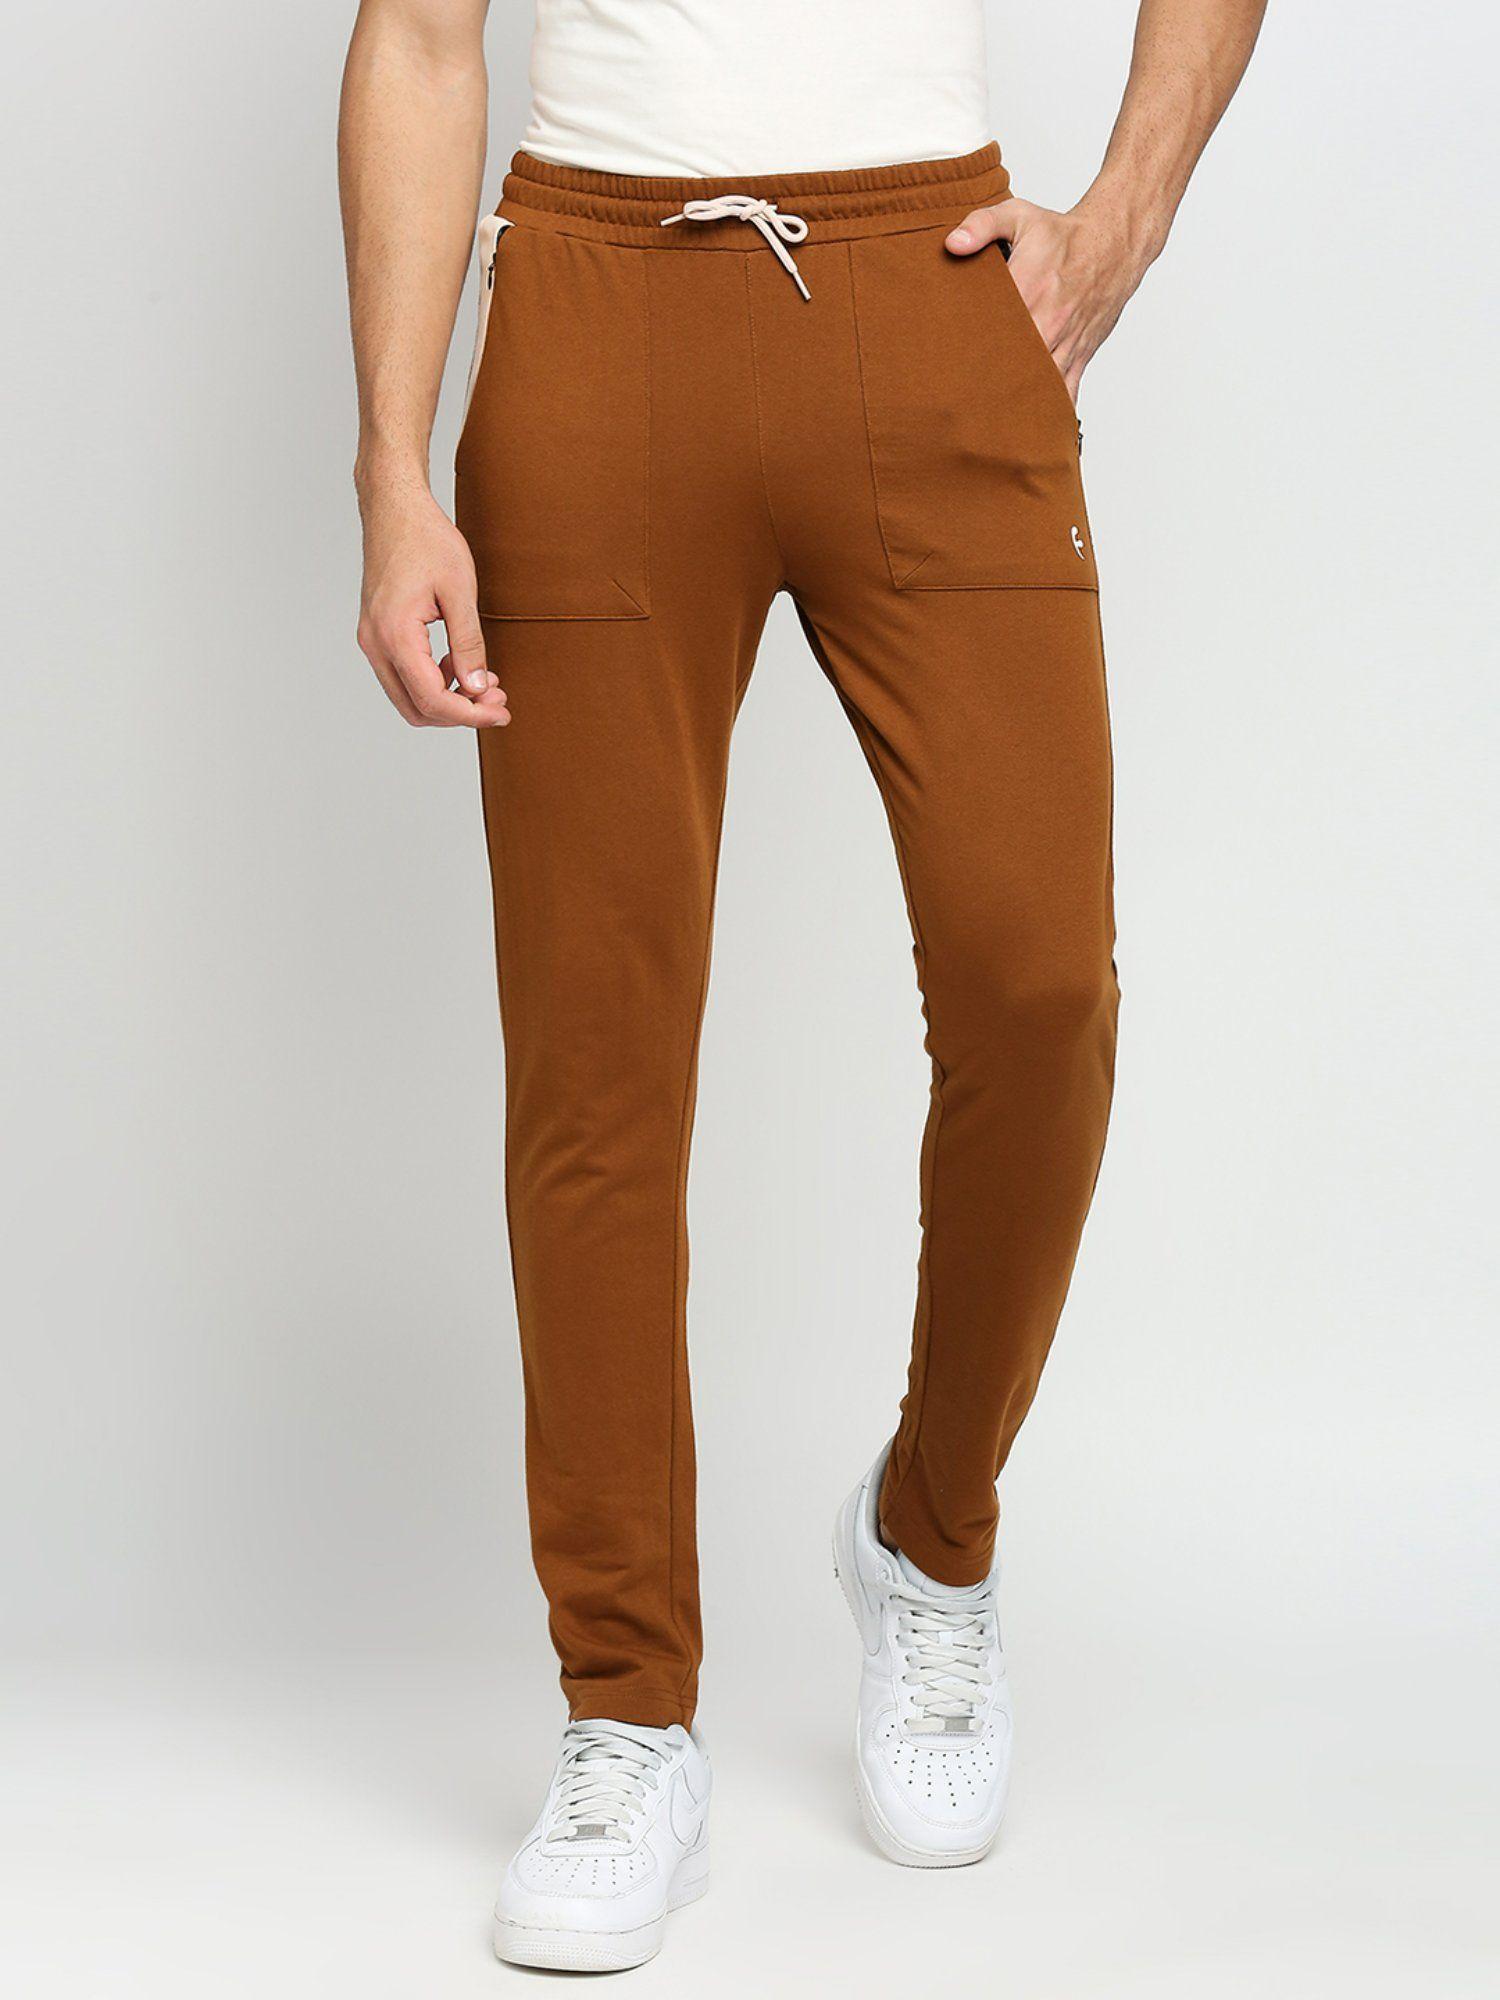 cotton polyester slim fit french terry knit joggers for mens - brown